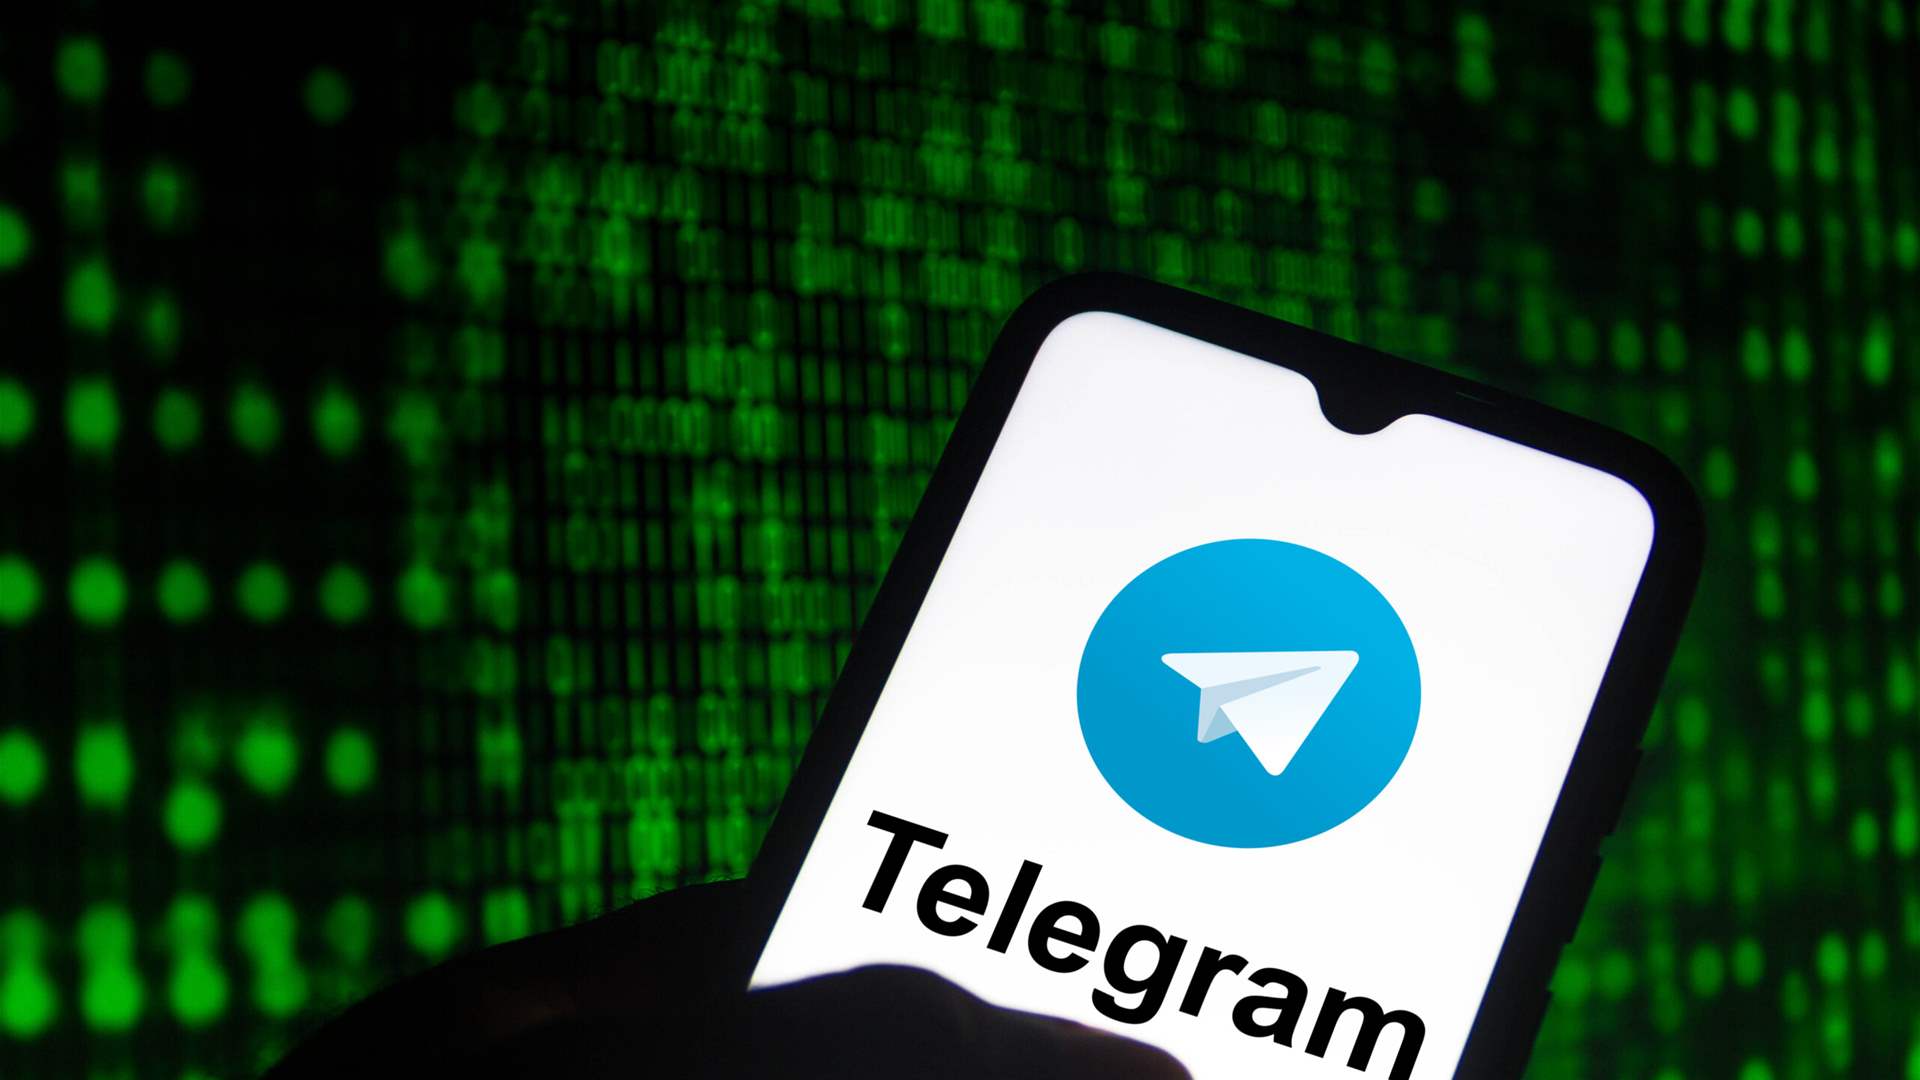 Iraq suspends Telegram messaging application for &quot;national security&quot; reasons: Statement